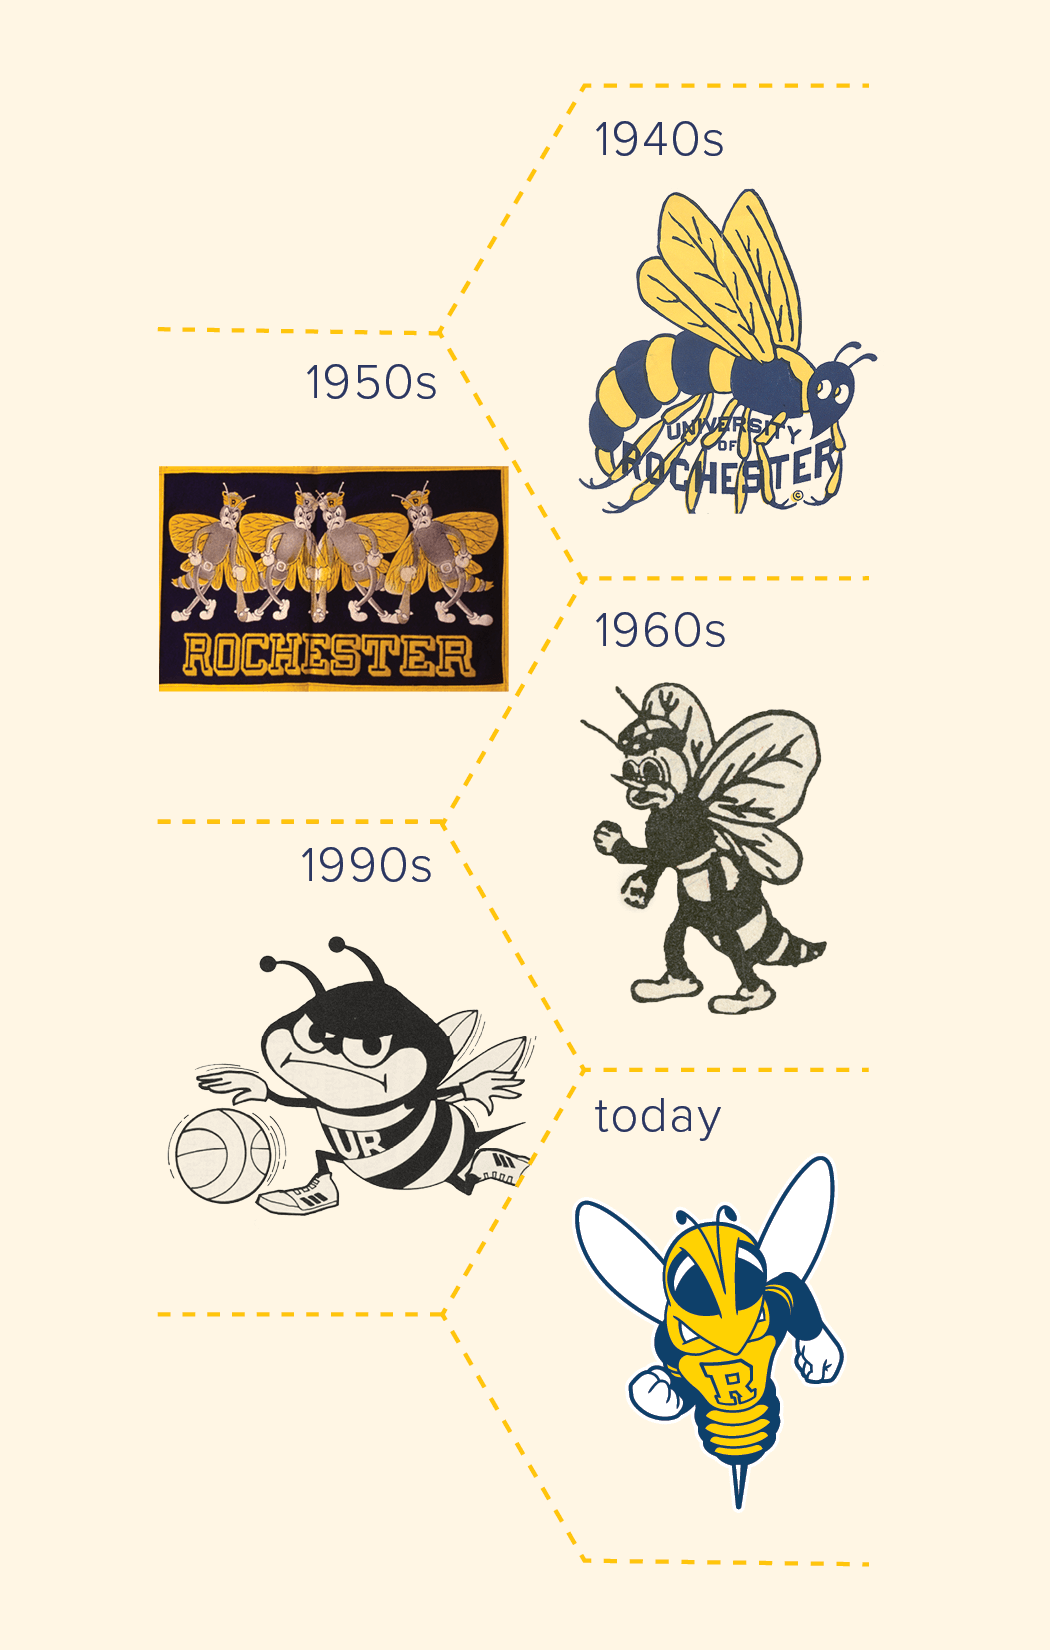 An illustrative timeline timeline of all the yellow jacket mascots named rocky for the university of Rochester